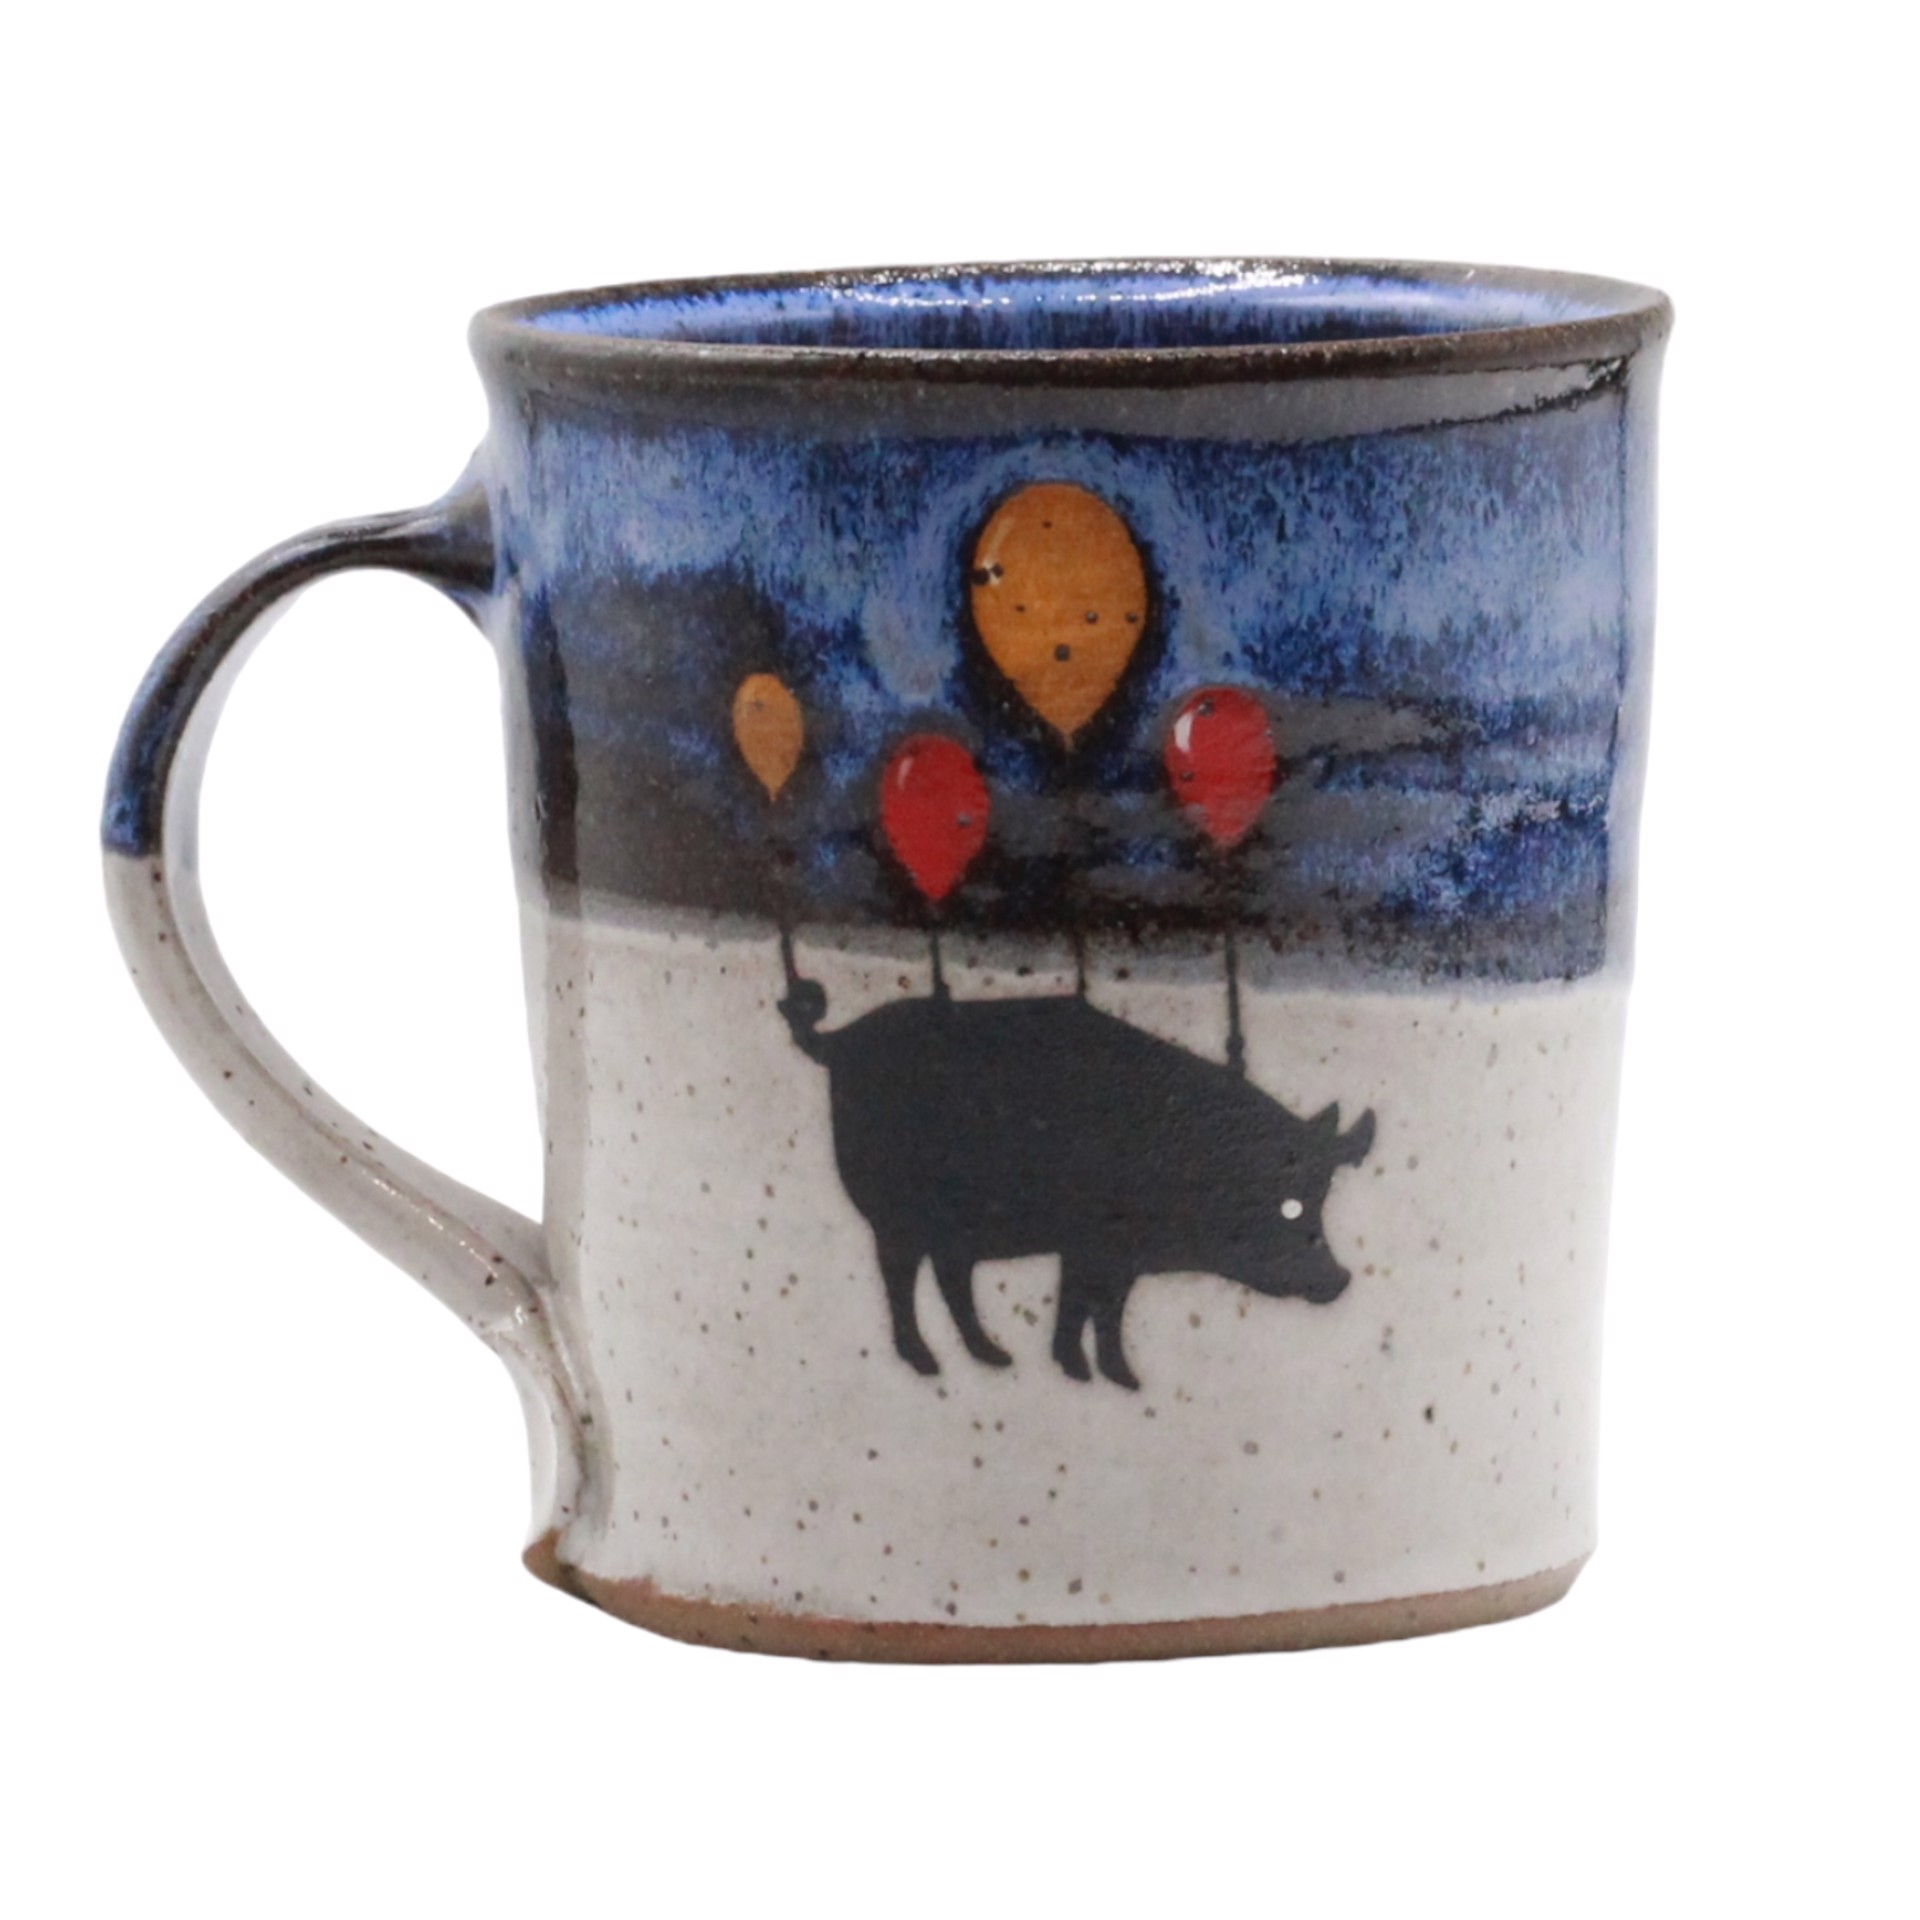 When Pigs Fly Mug by Stephen Mullins